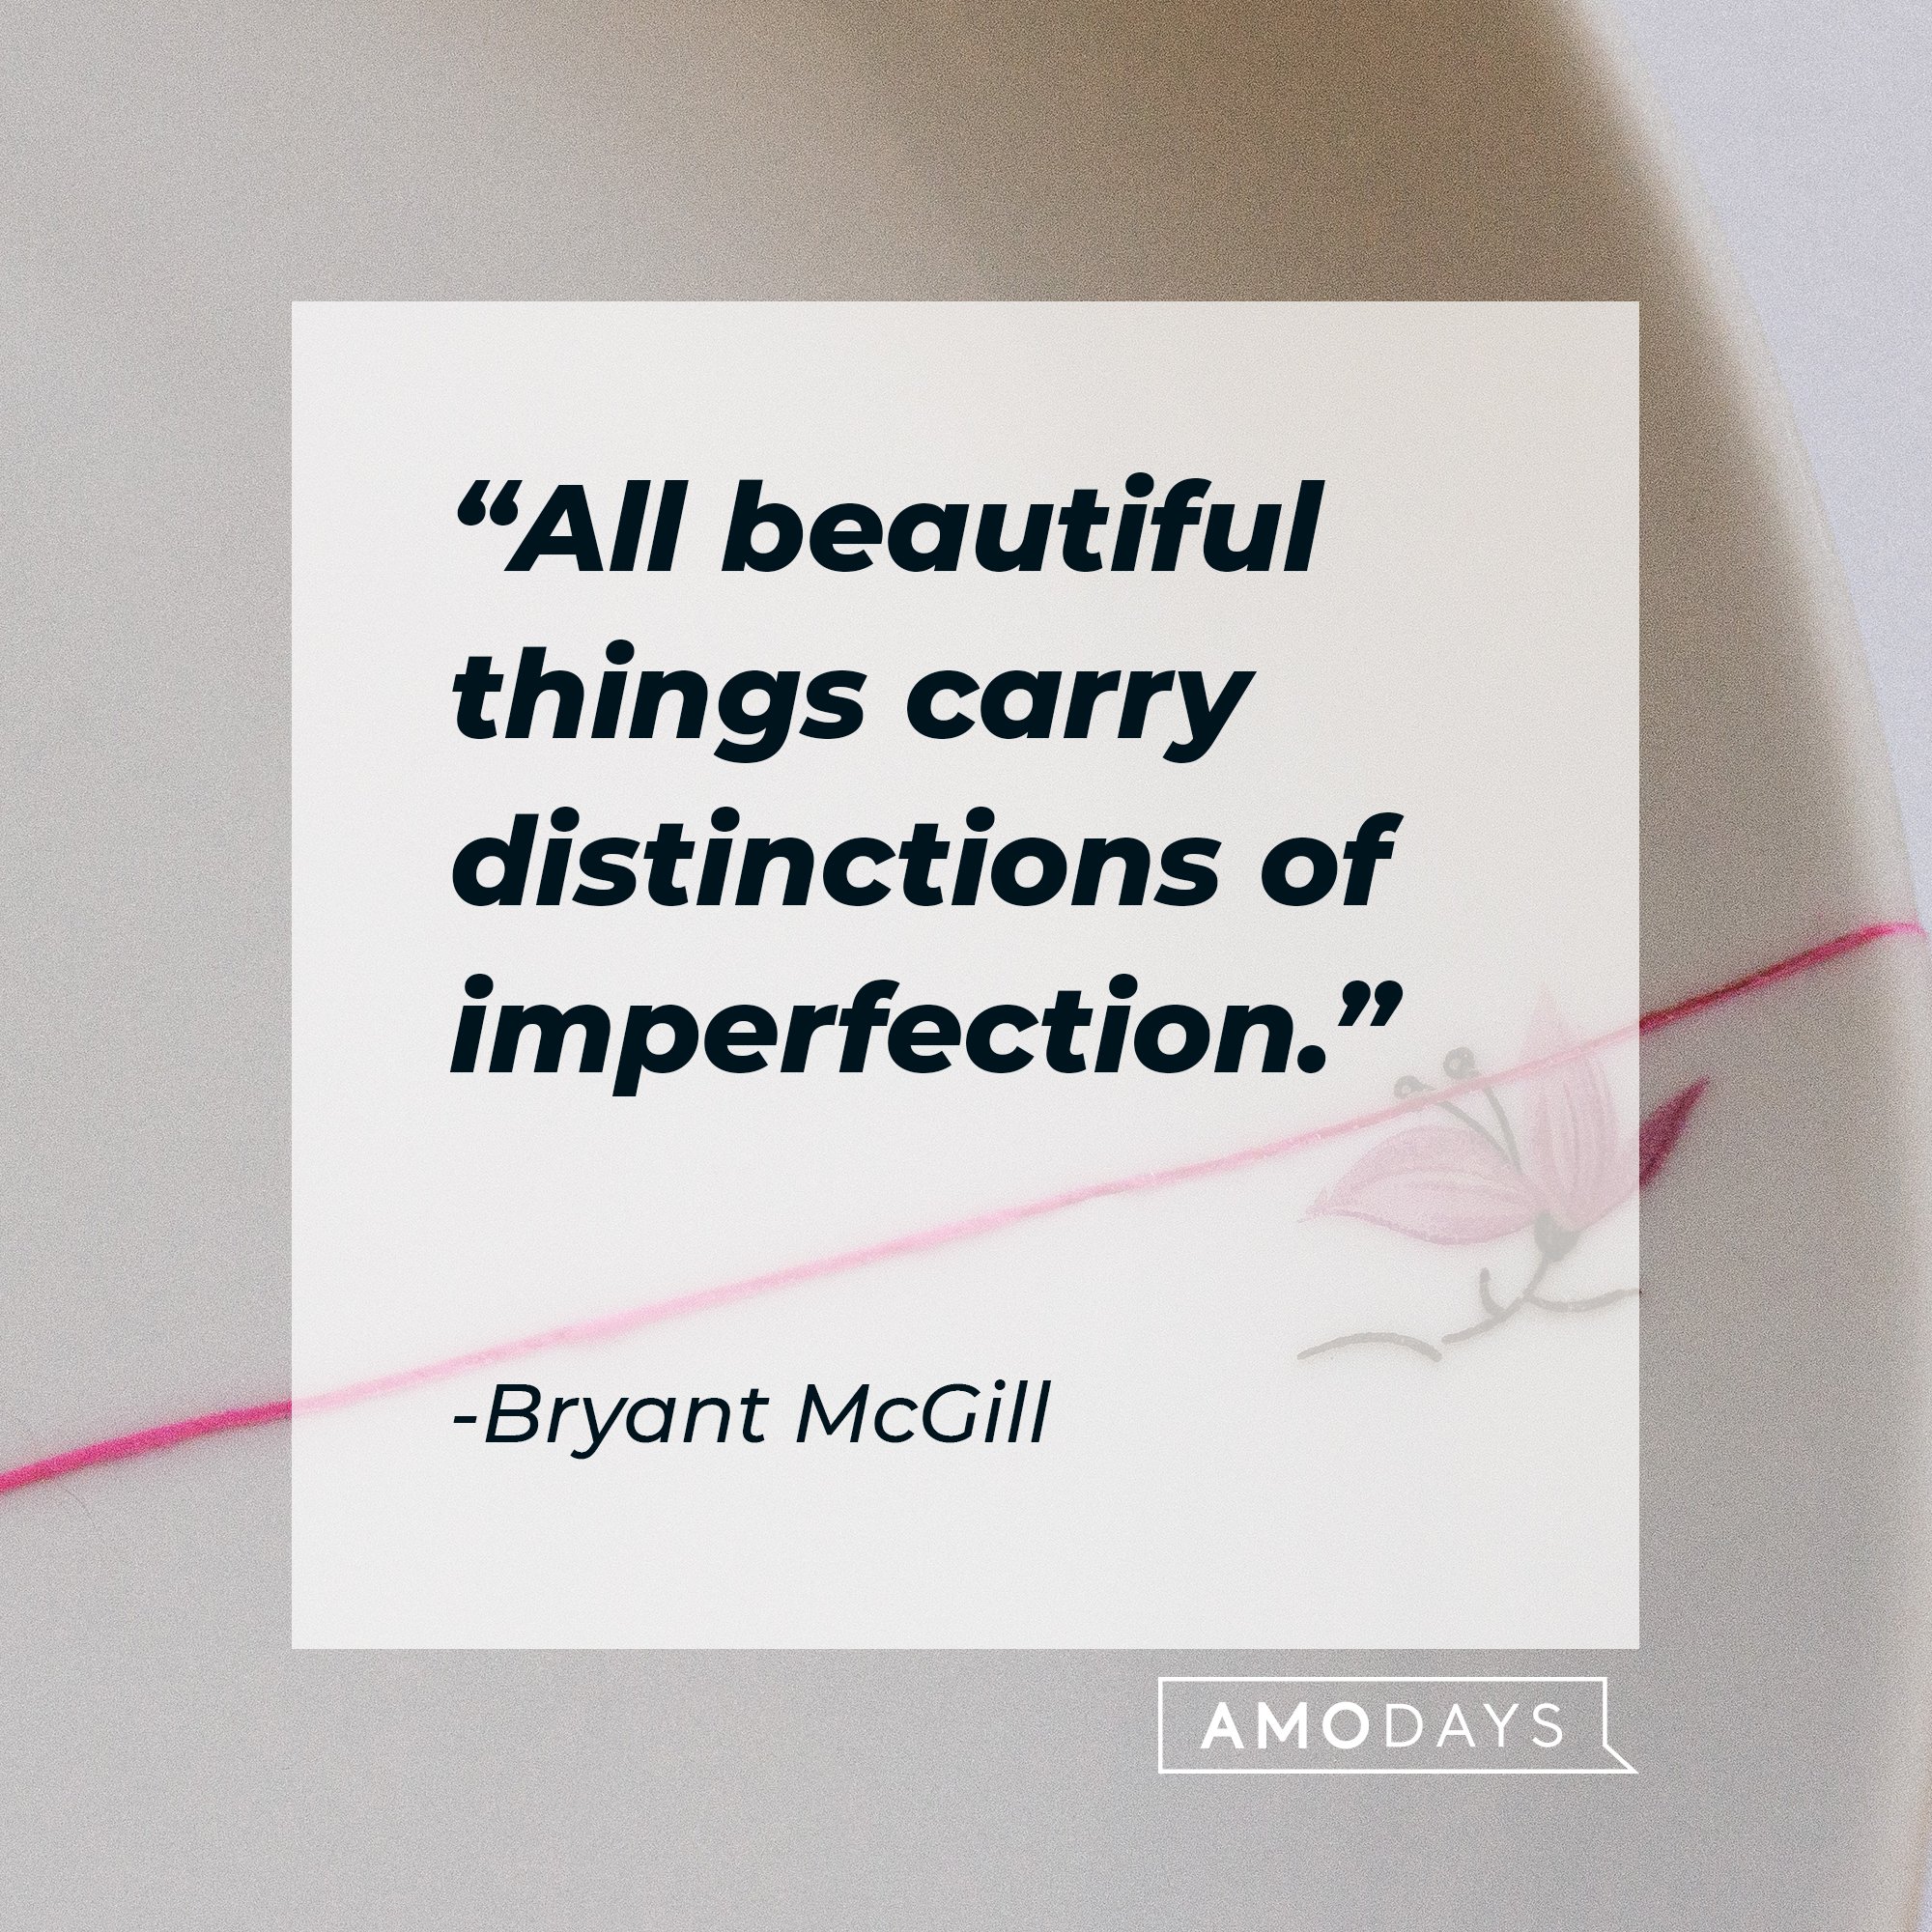 Bryant McGill’s quote: "All beautiful things carry distinctions of imperfection." | Image: AmoDays